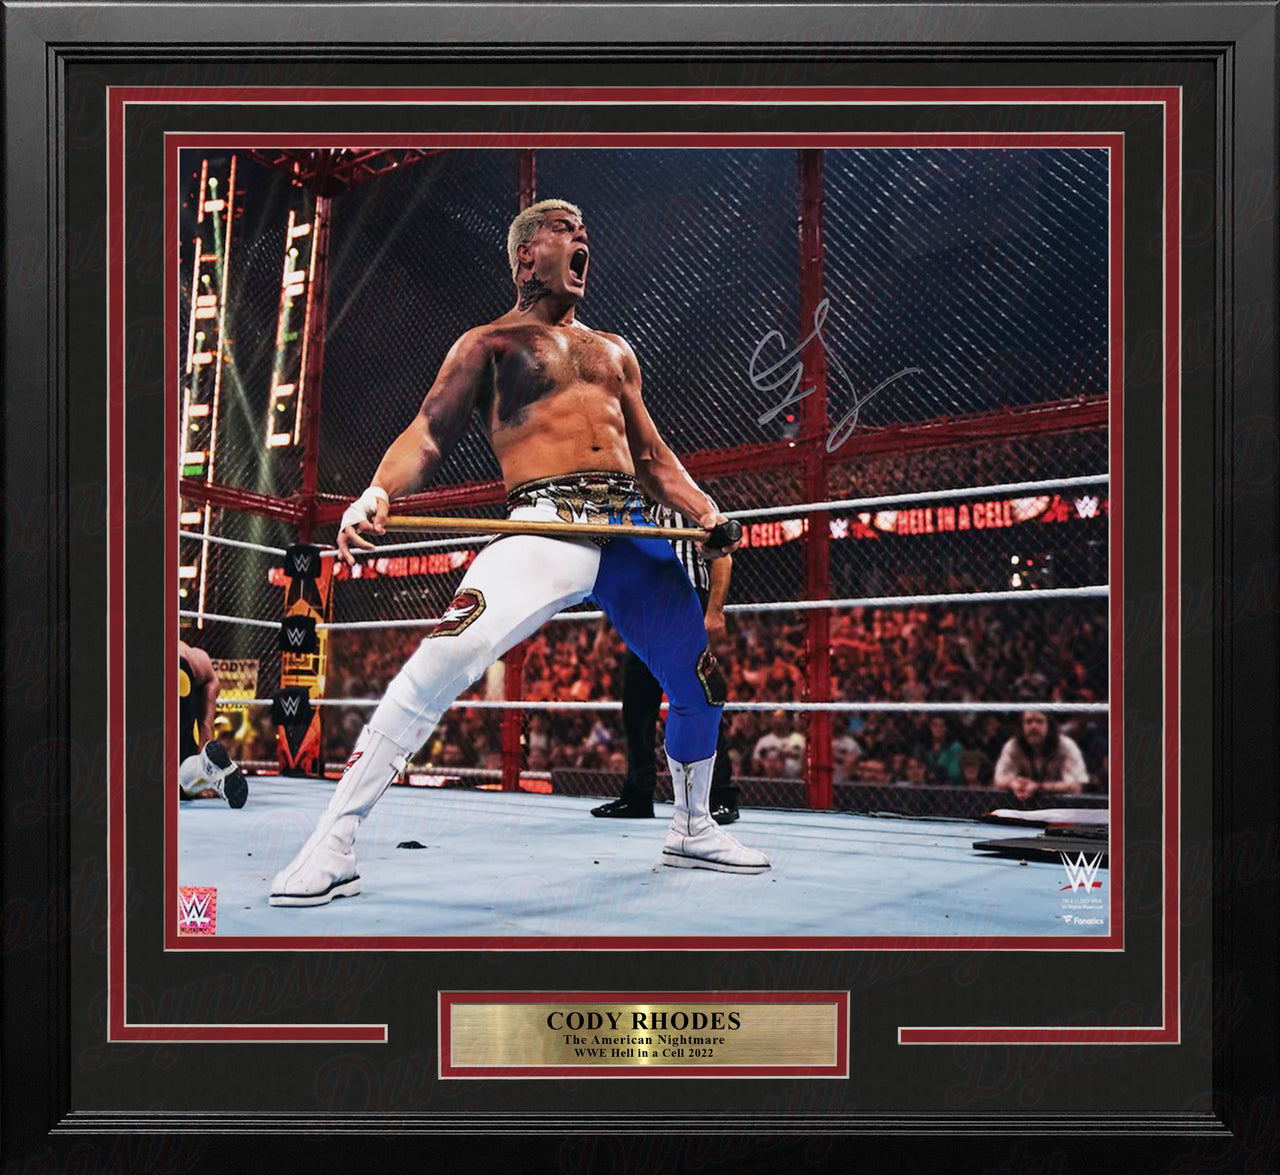 Cody Rhodes Hell in a Cell with a Sledgehammer Autographed 16" x 20" Framed Wrestling Photo - Dynasty Sports & Framing 